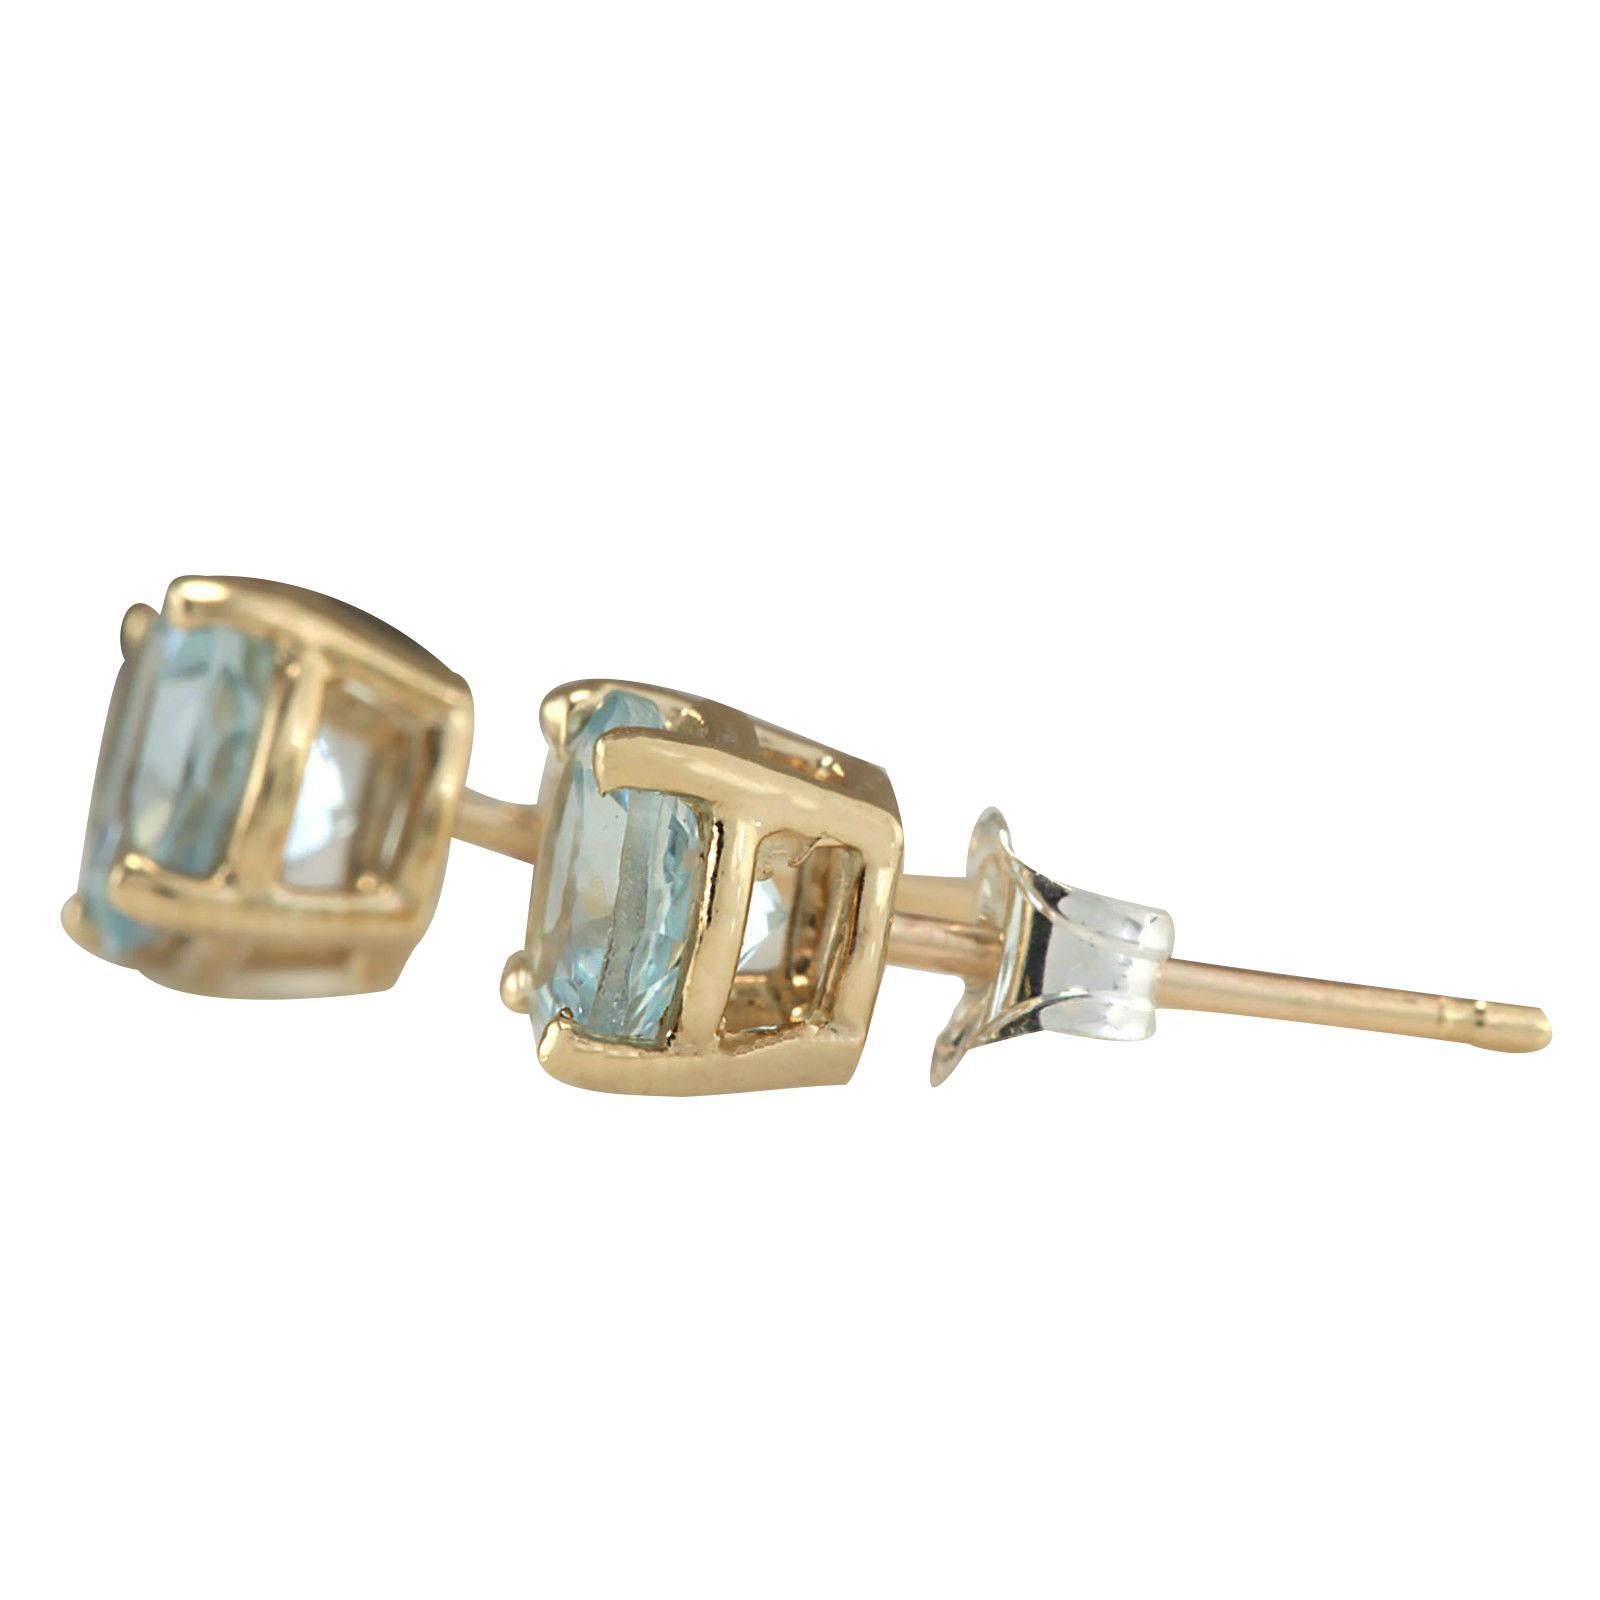 Stamped: 14K Yellow Gold
Total Earrings Weight: 1.0 Grams
Total Natural Aquamarine Weight is 1.06 Carat (Measures: 5.50x5.50 mm)
Color: Blue
Face Measures: 5.50x5.50 mm
Sku: [703167W]